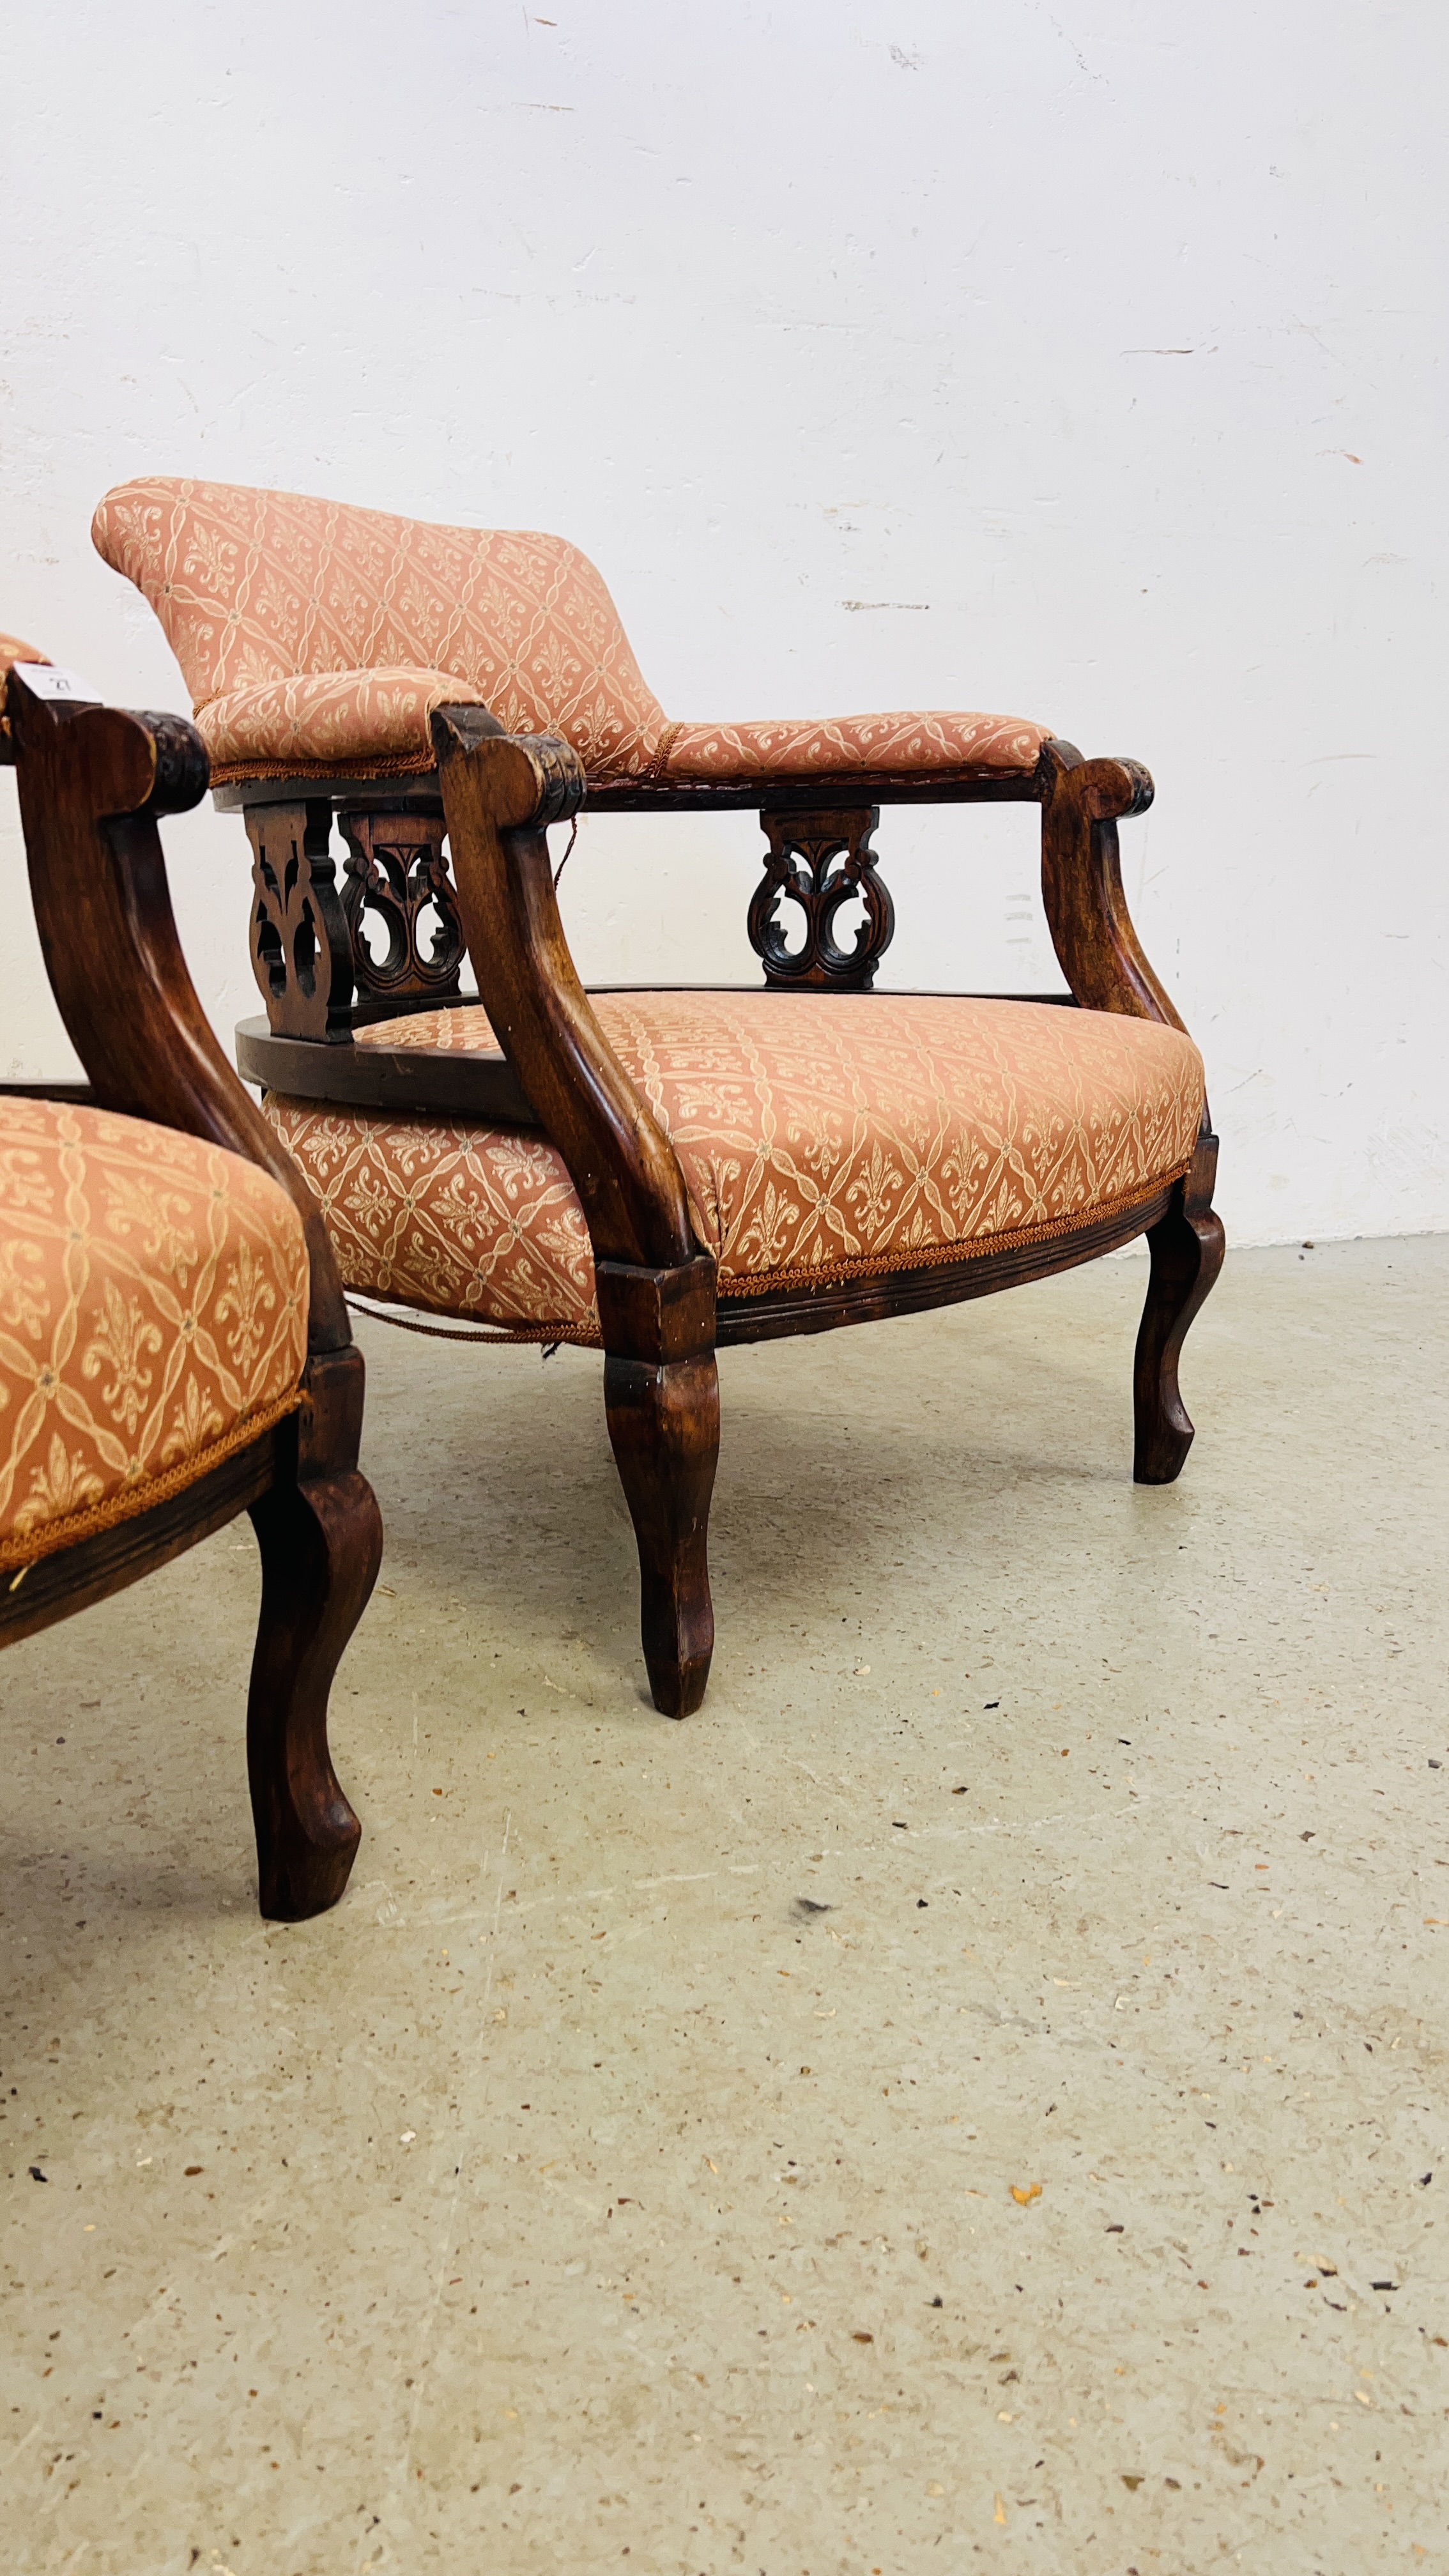 A PAIR OF MAHOGANY FRAMED TUB CHAIRS. - Image 7 of 10